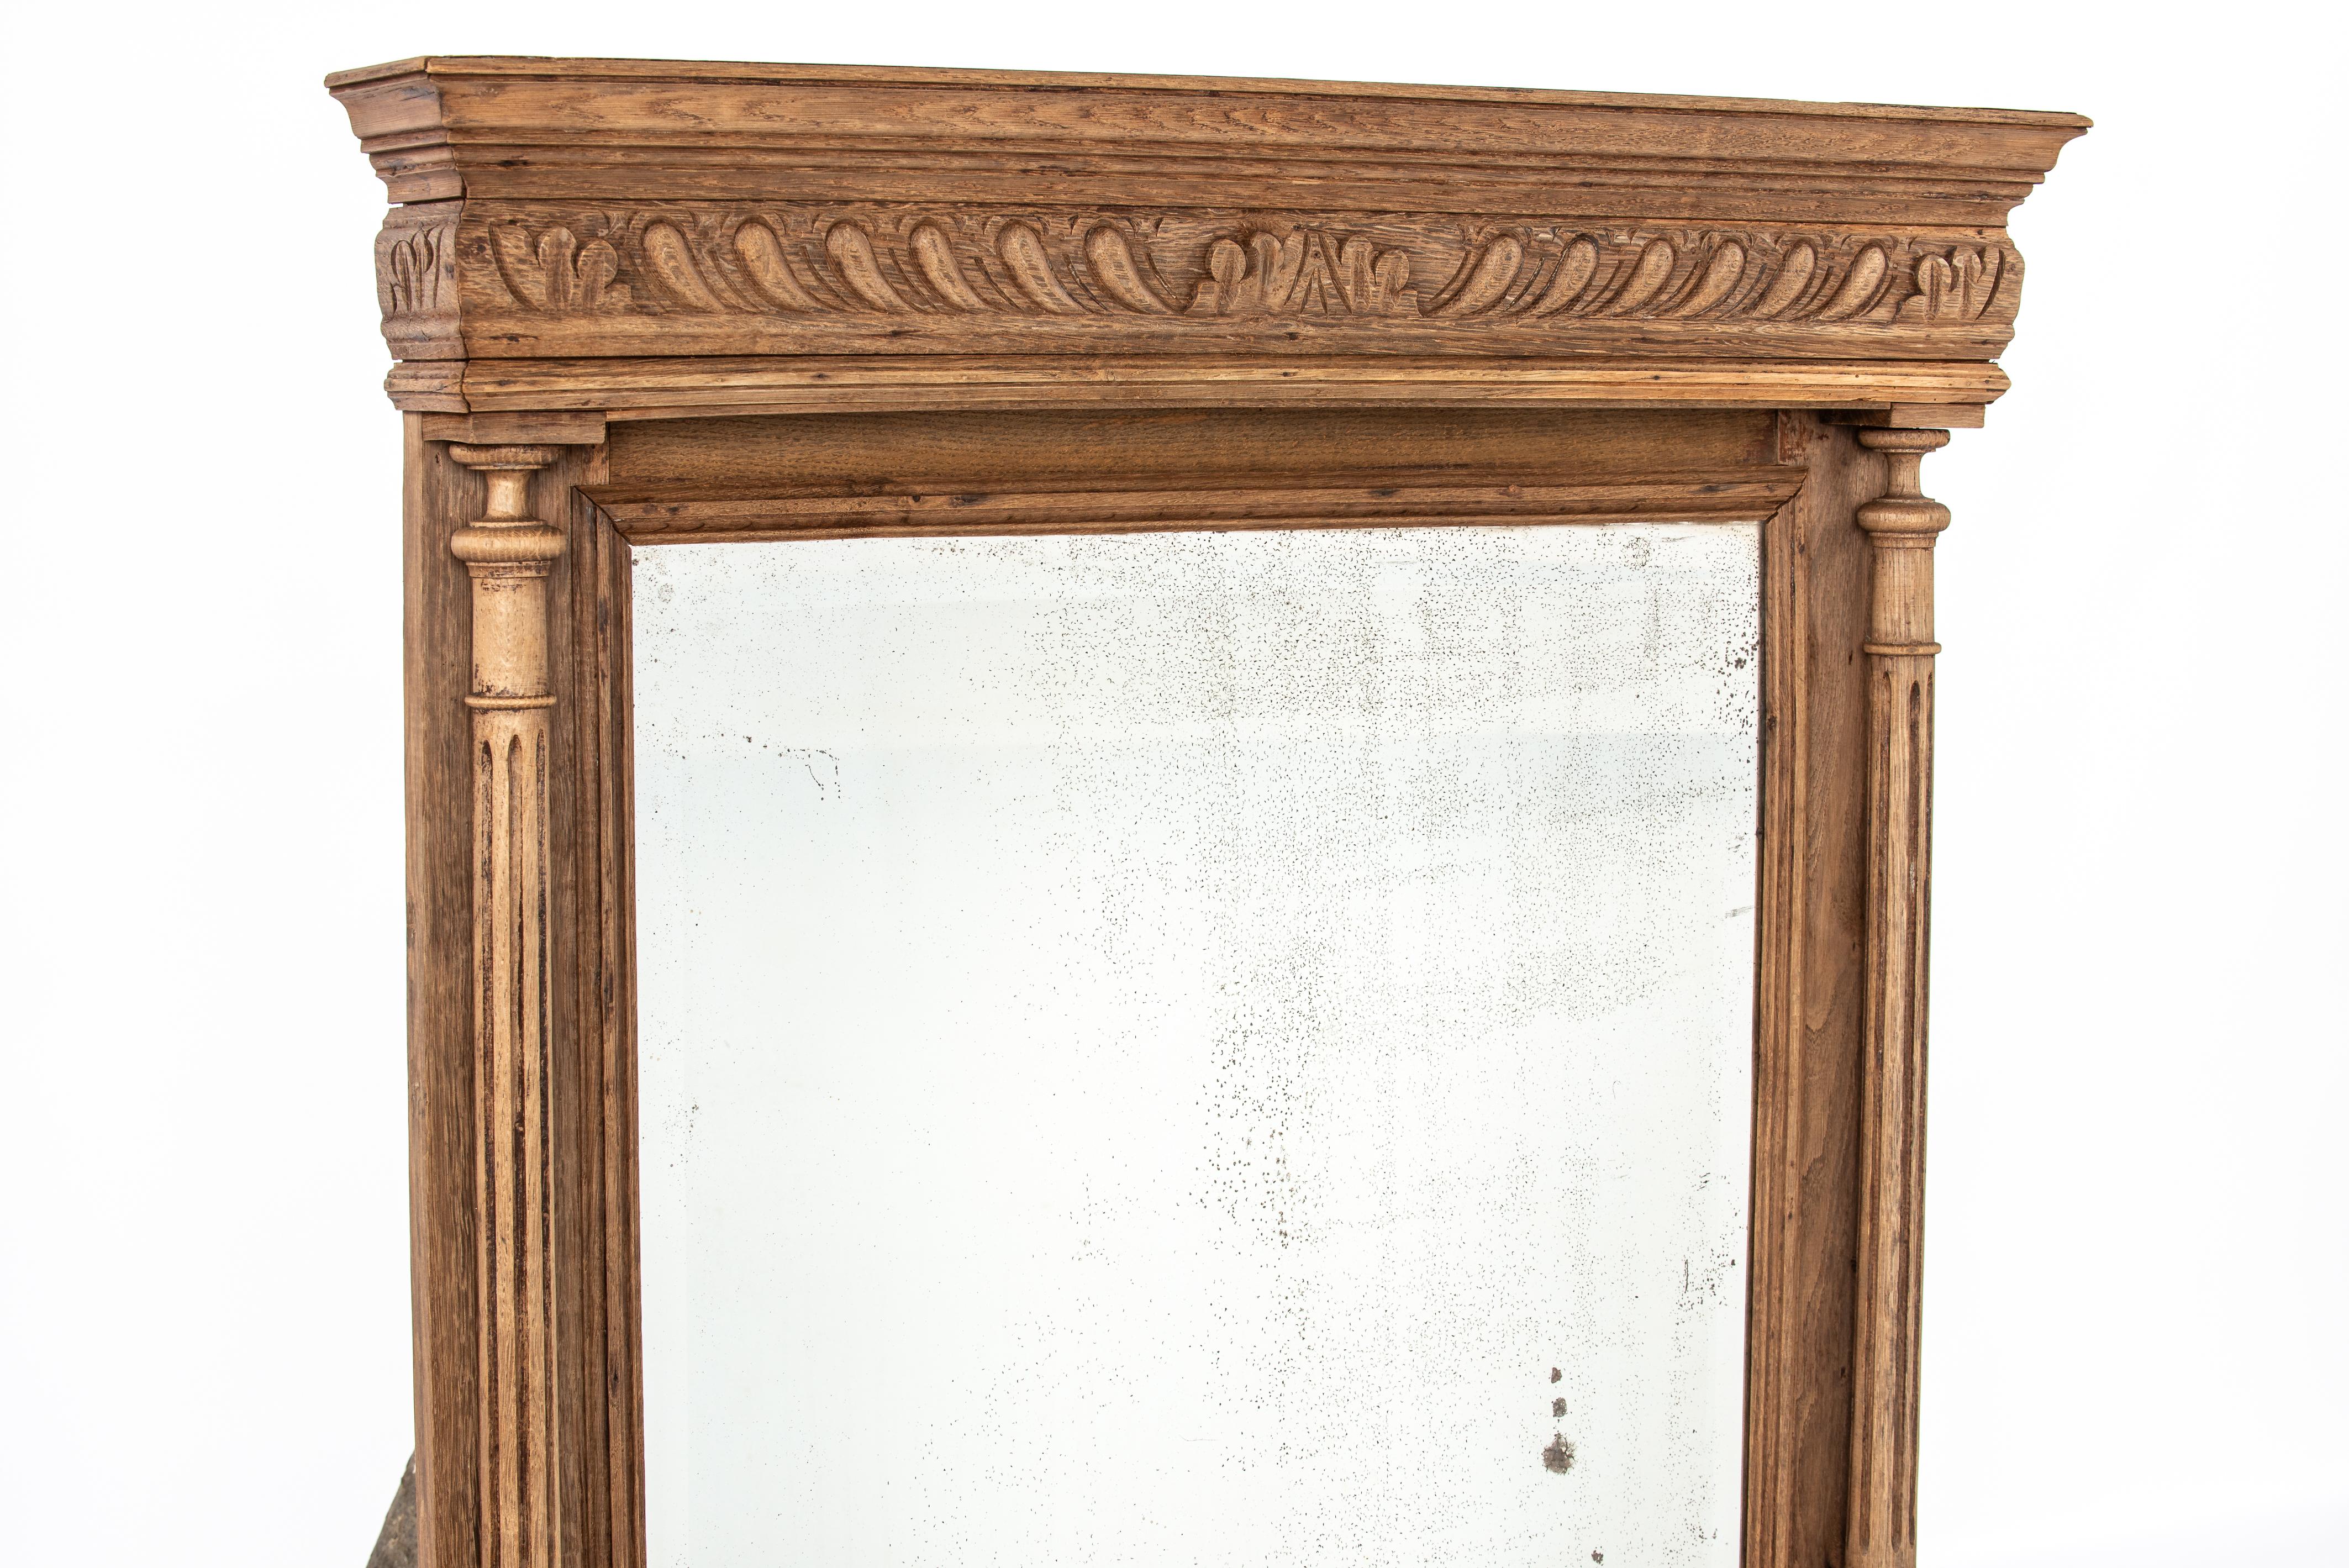 On offer here is an antique solid oak Henri Deux mirror that was made in northern France in the early 20th century. It was elaborately decorated with two handsome turned columns flanking the glass. Above a gadrooned frieze ending in acanthus. The